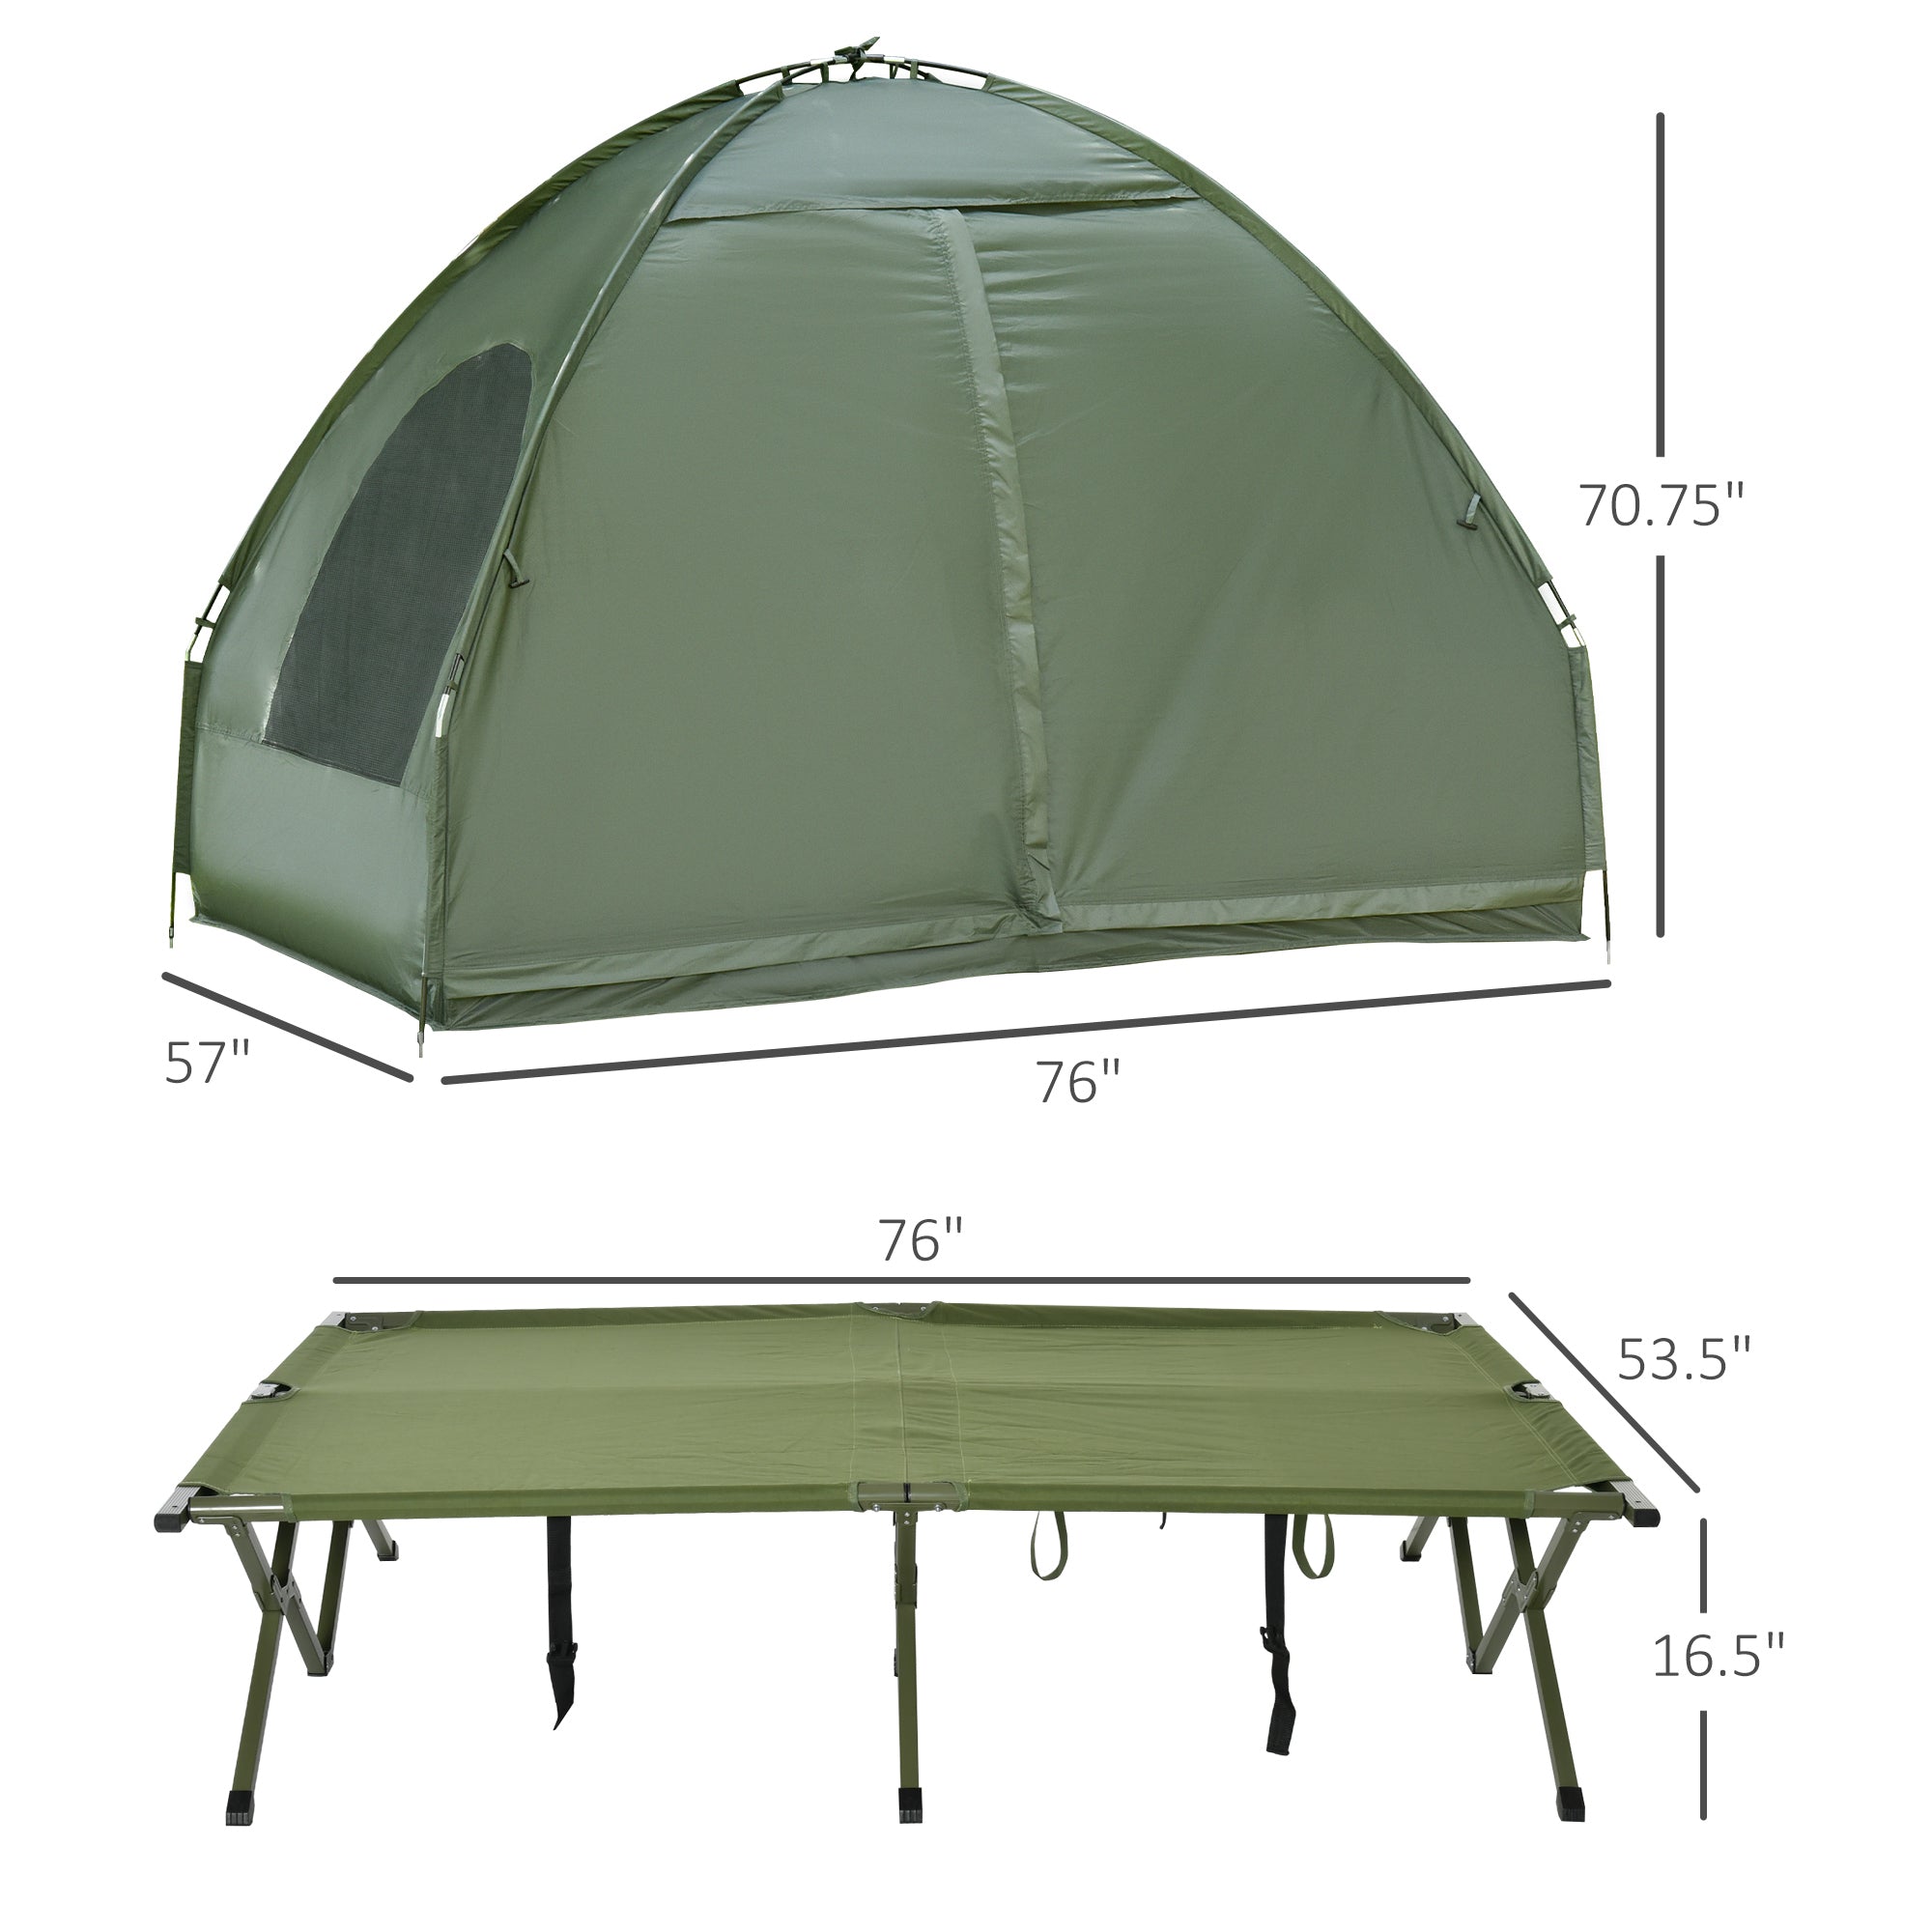 2-Person Foldable Camping Cot, Portable Outdoor w/ Bedspread & Thick Air Mattress, 4-In-1 Elevated Camping Bed Tent for Hiking, Picnic, Green